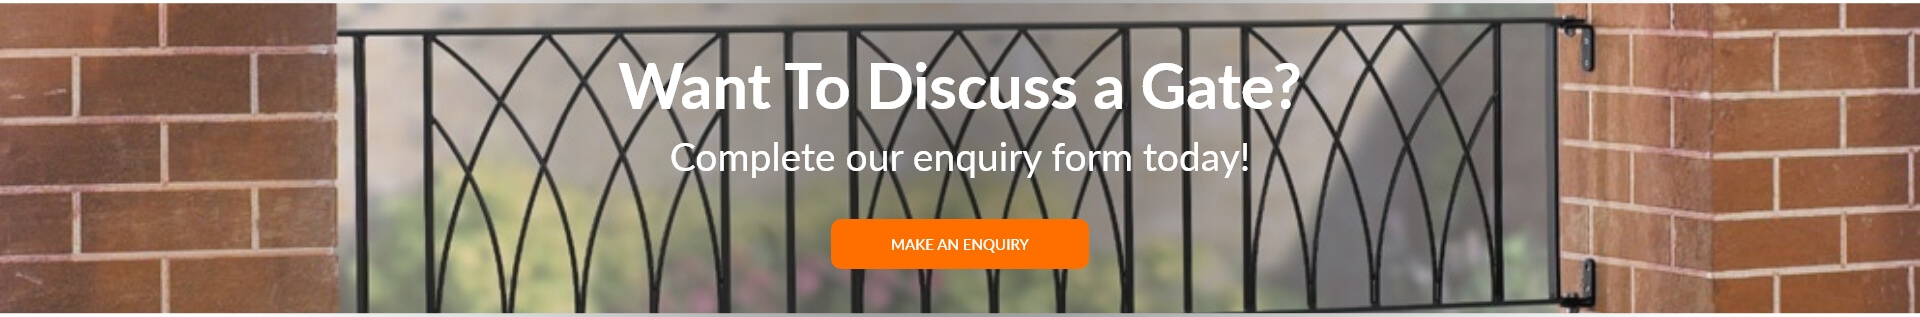 Want to discuss a gate? Fill in our enquiry form